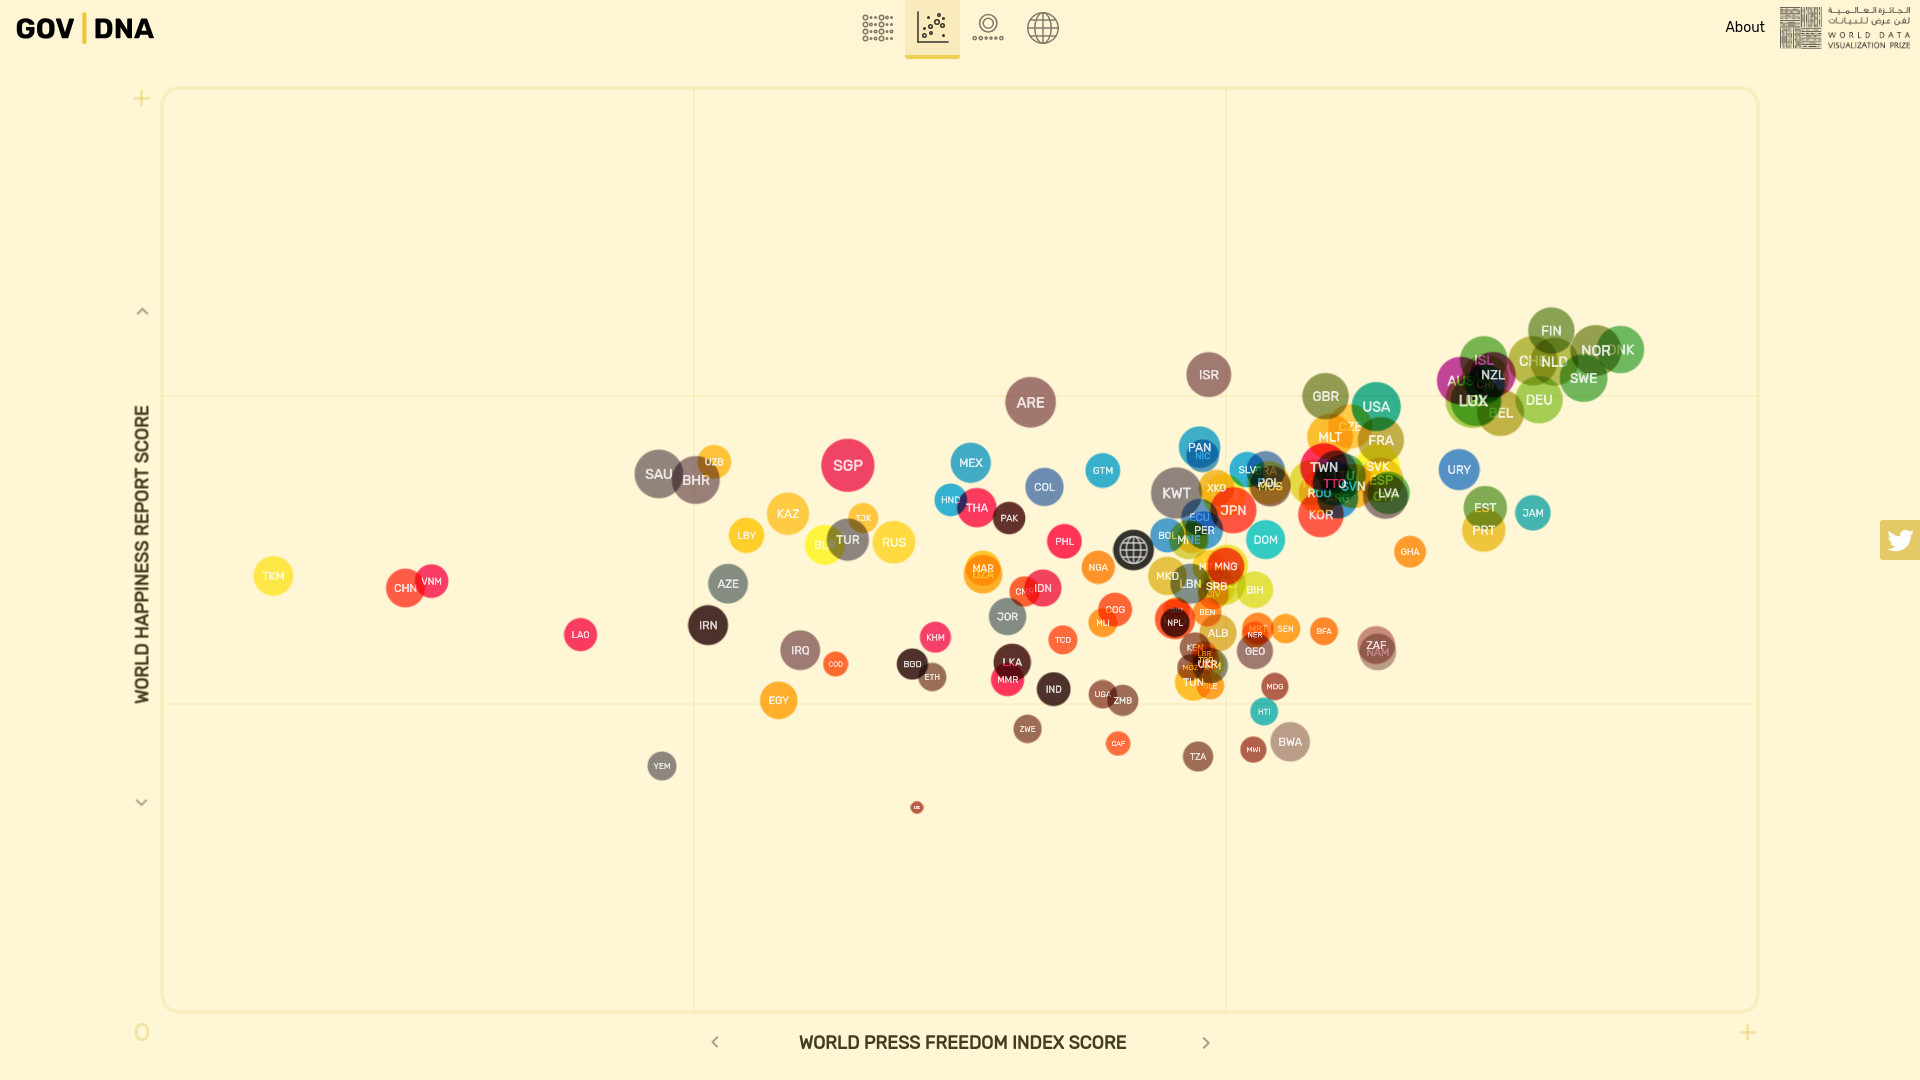 Interactive bubble chart showing data for "good" and "map" governments based on various scores